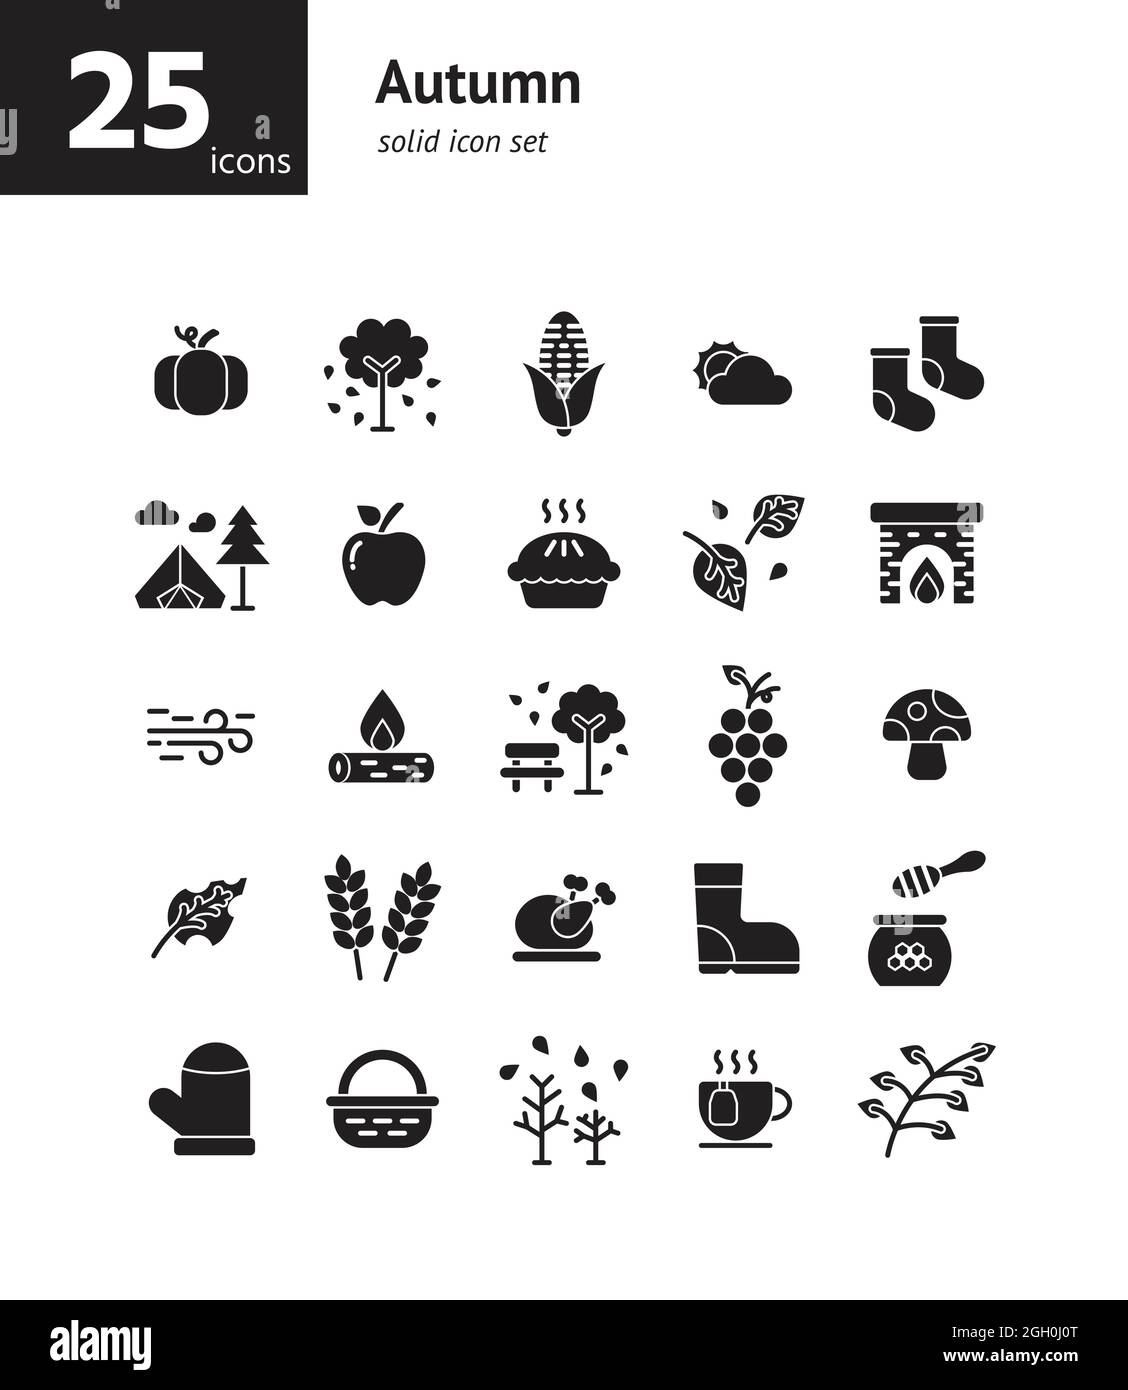 Autumn solid icon set. Vector and Illustration. Stock Vector